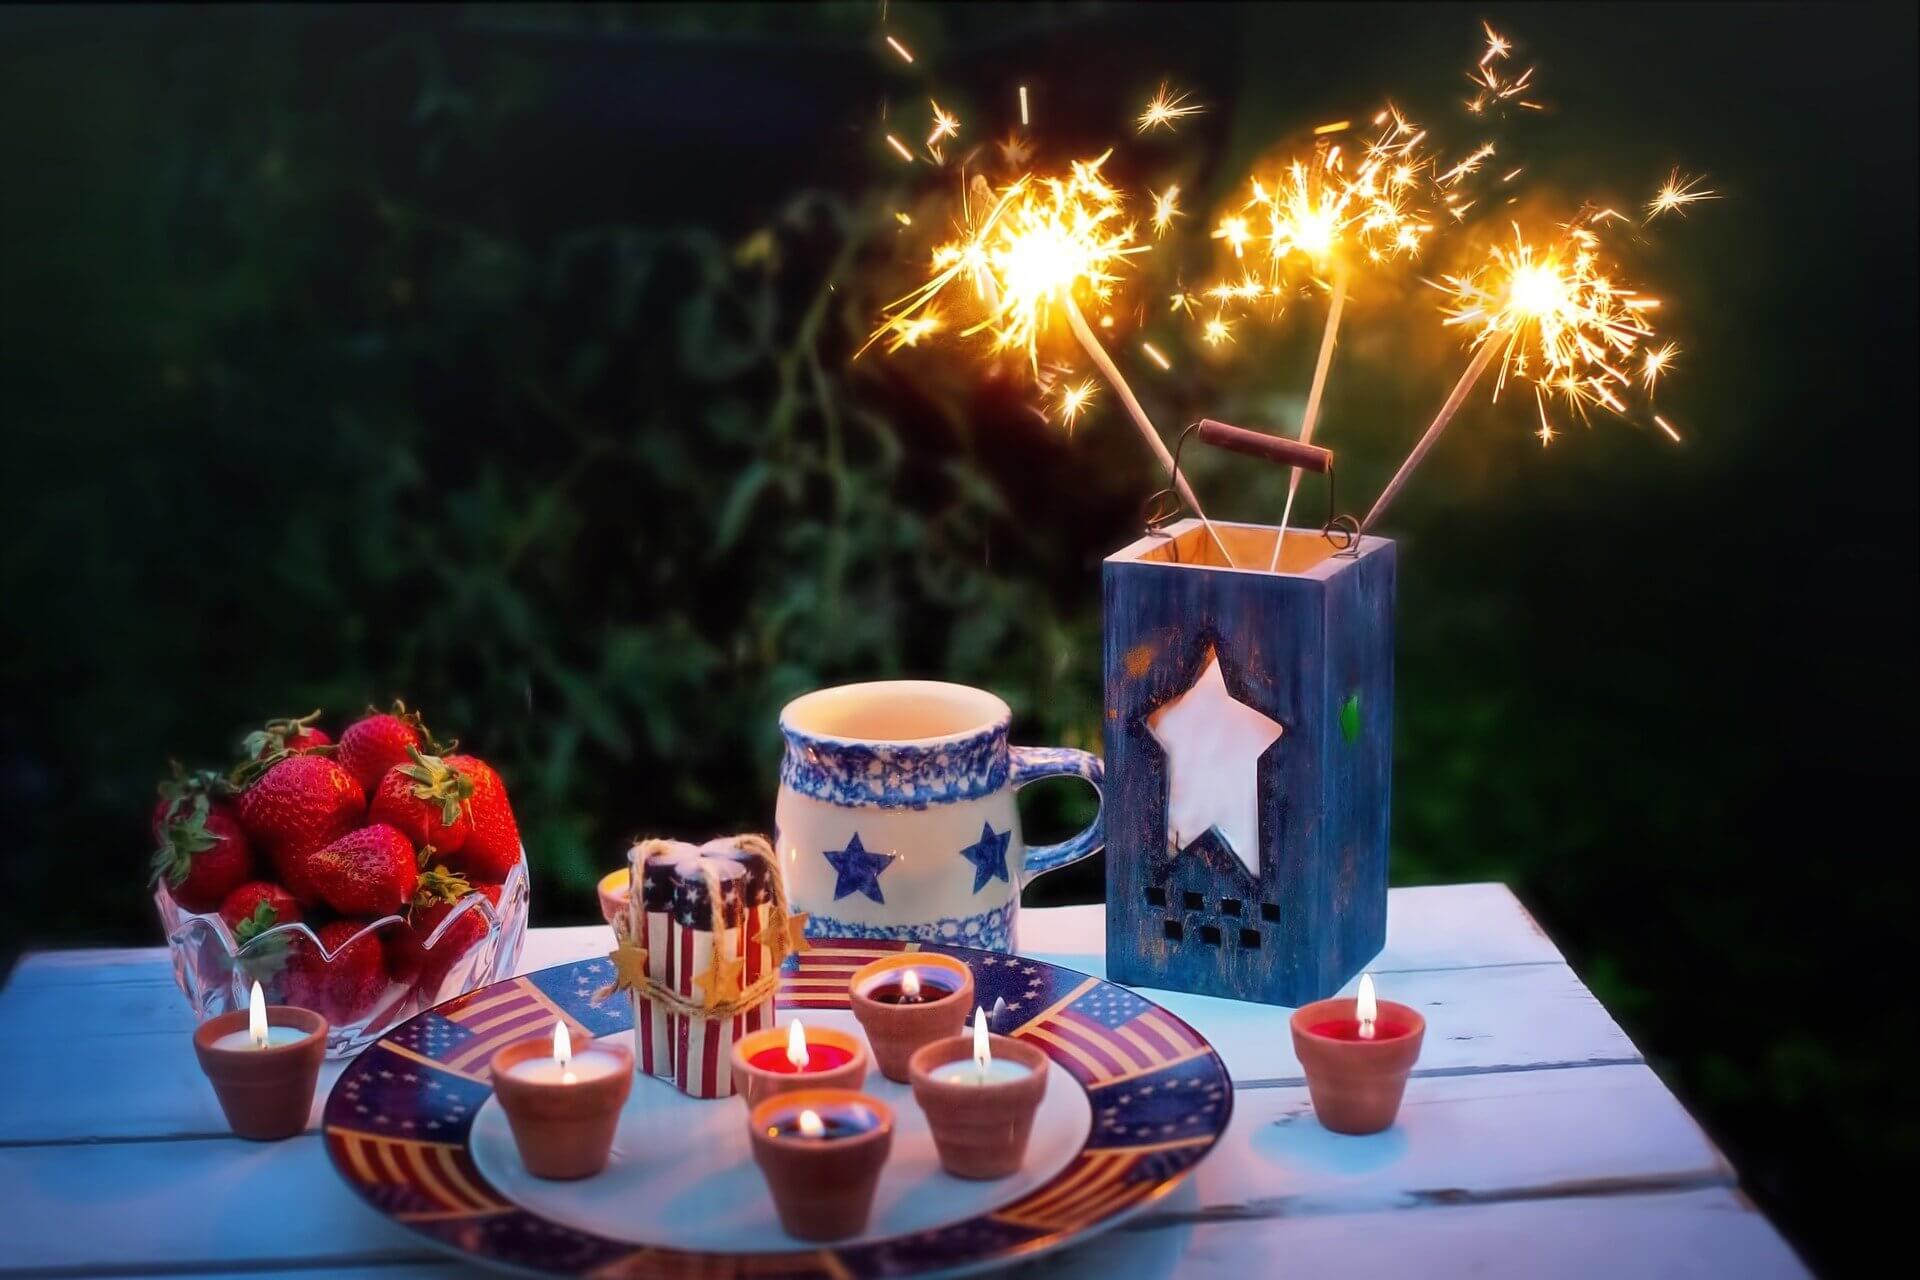 Firework Displays 101: Safety Tips for Cakes and Candles